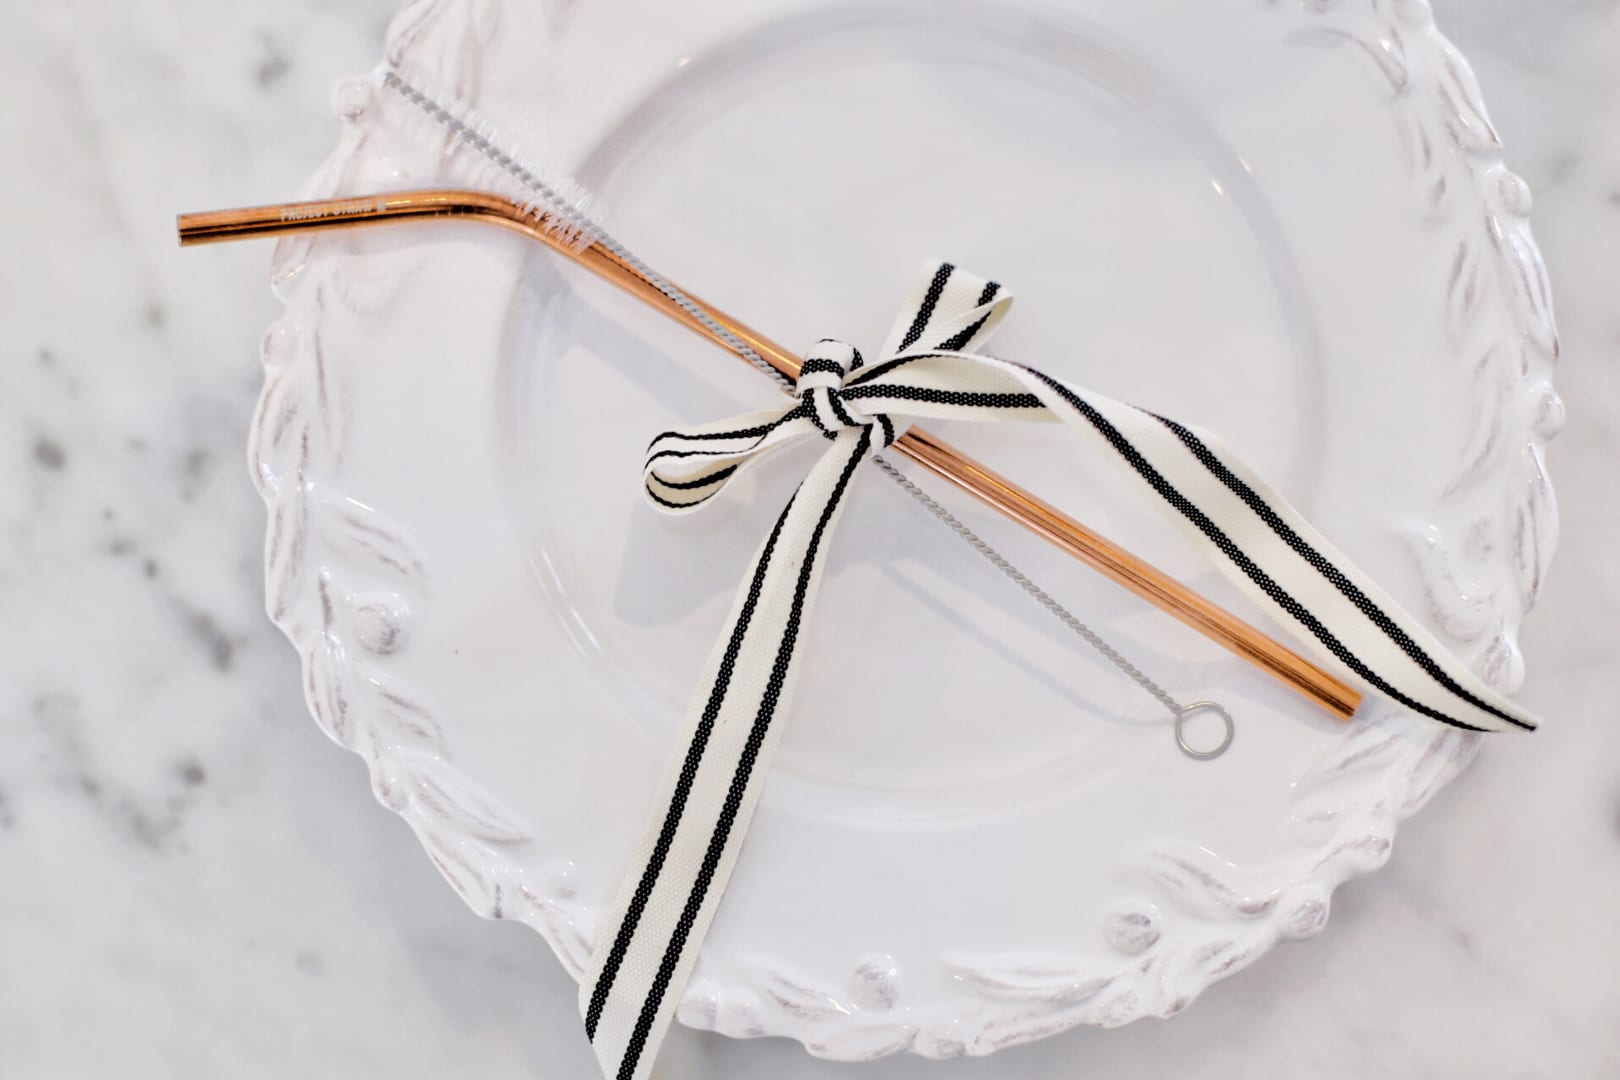 straw and brush tied with ribbon on plate